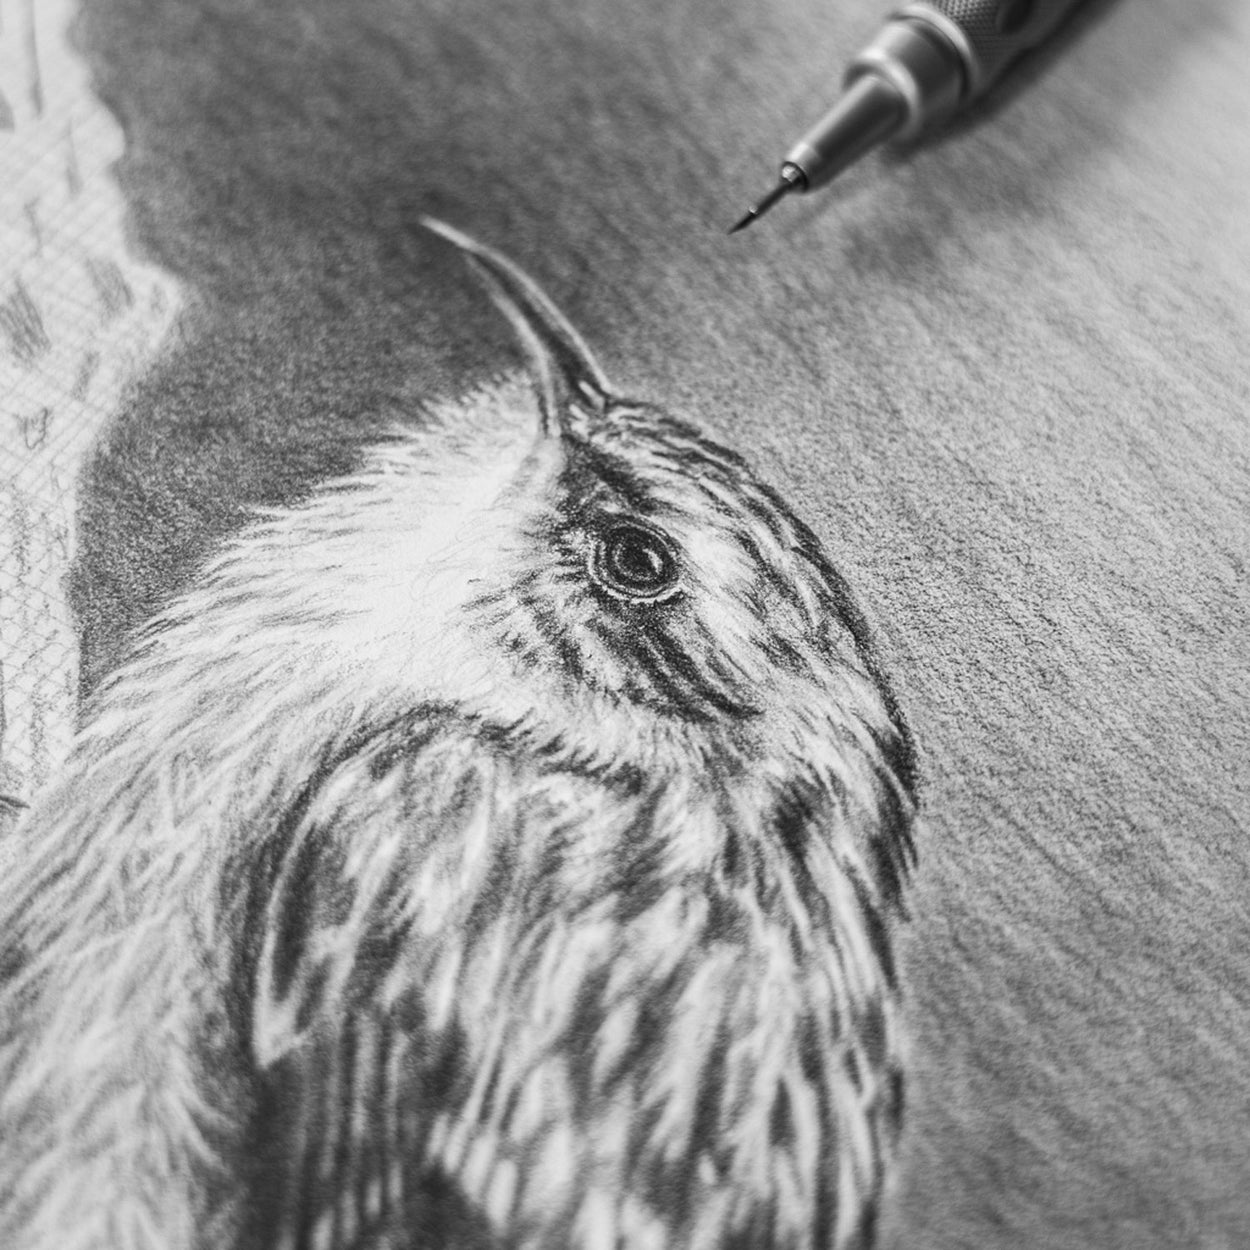 Pencil resting on paper with drawing in progress of a small bird's head